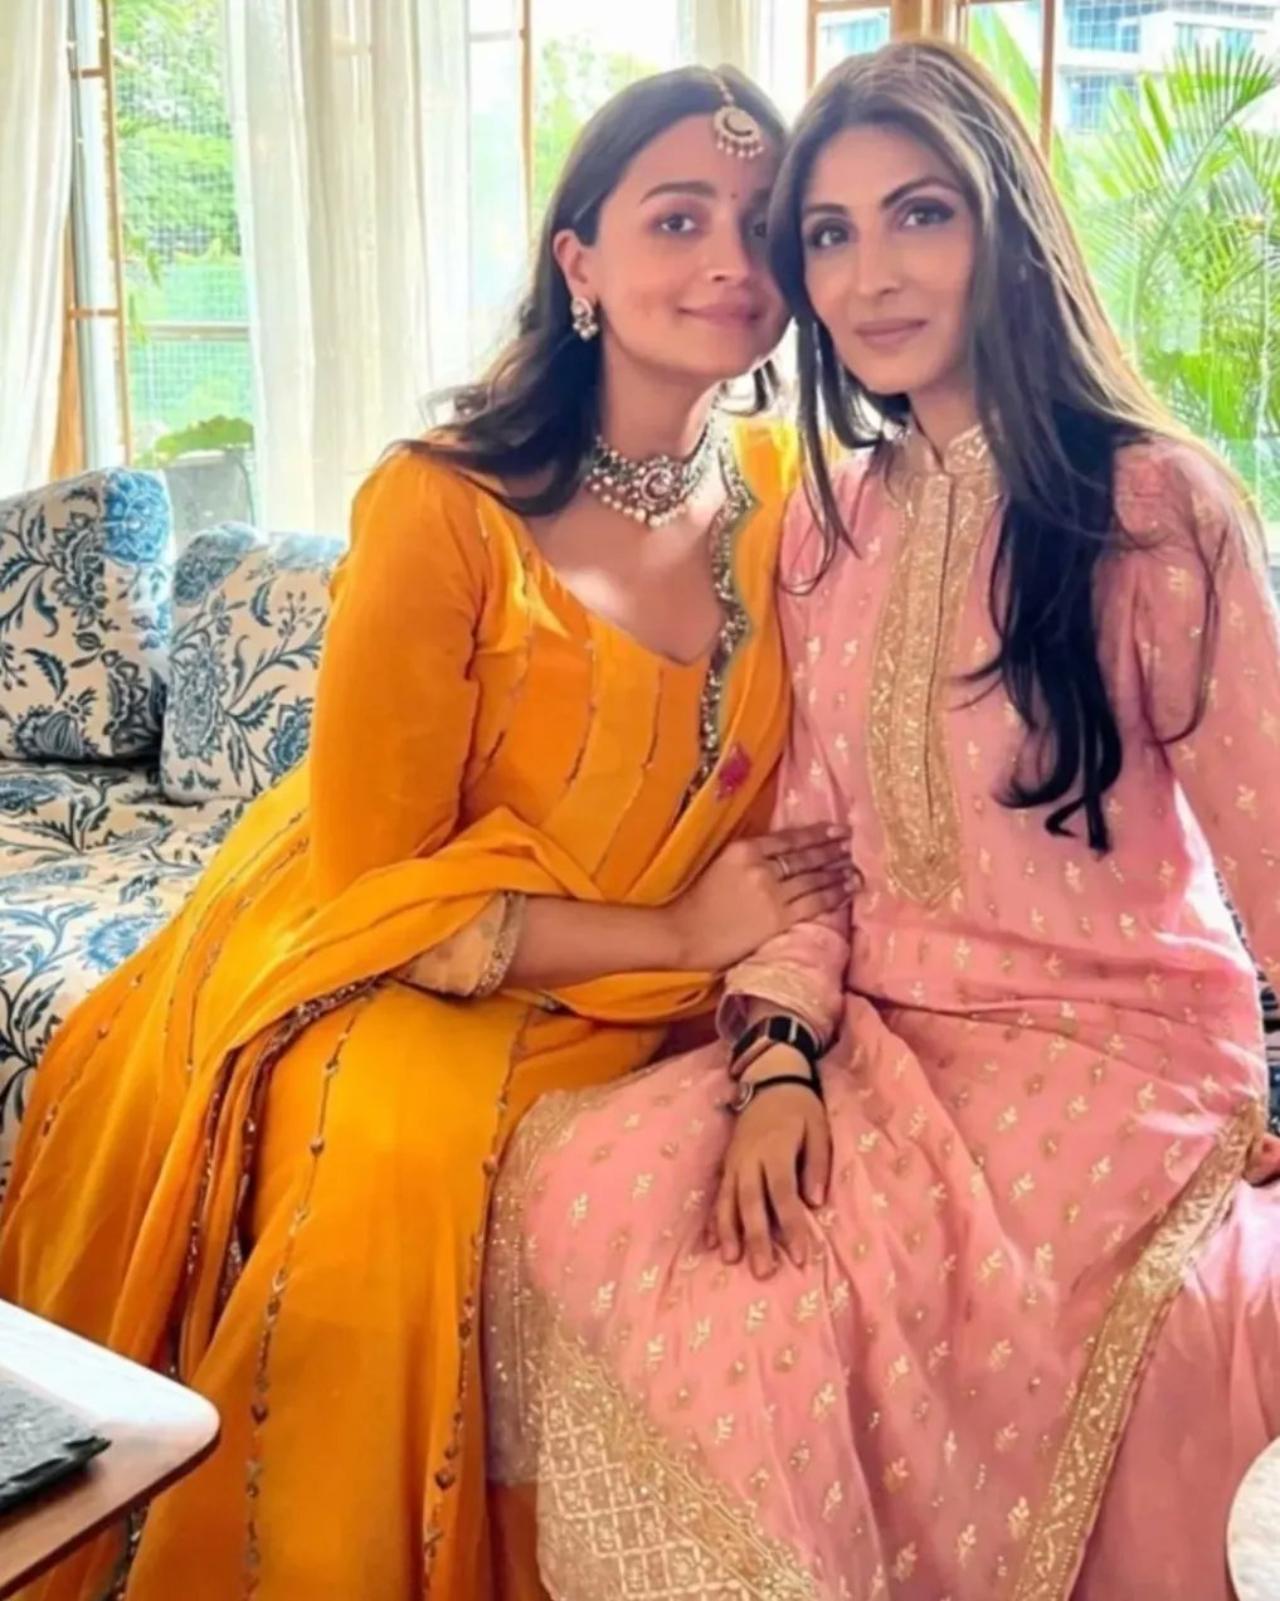 Riddhima also shared a picture with sister-in-law and mom-to-be Alia Bhatt